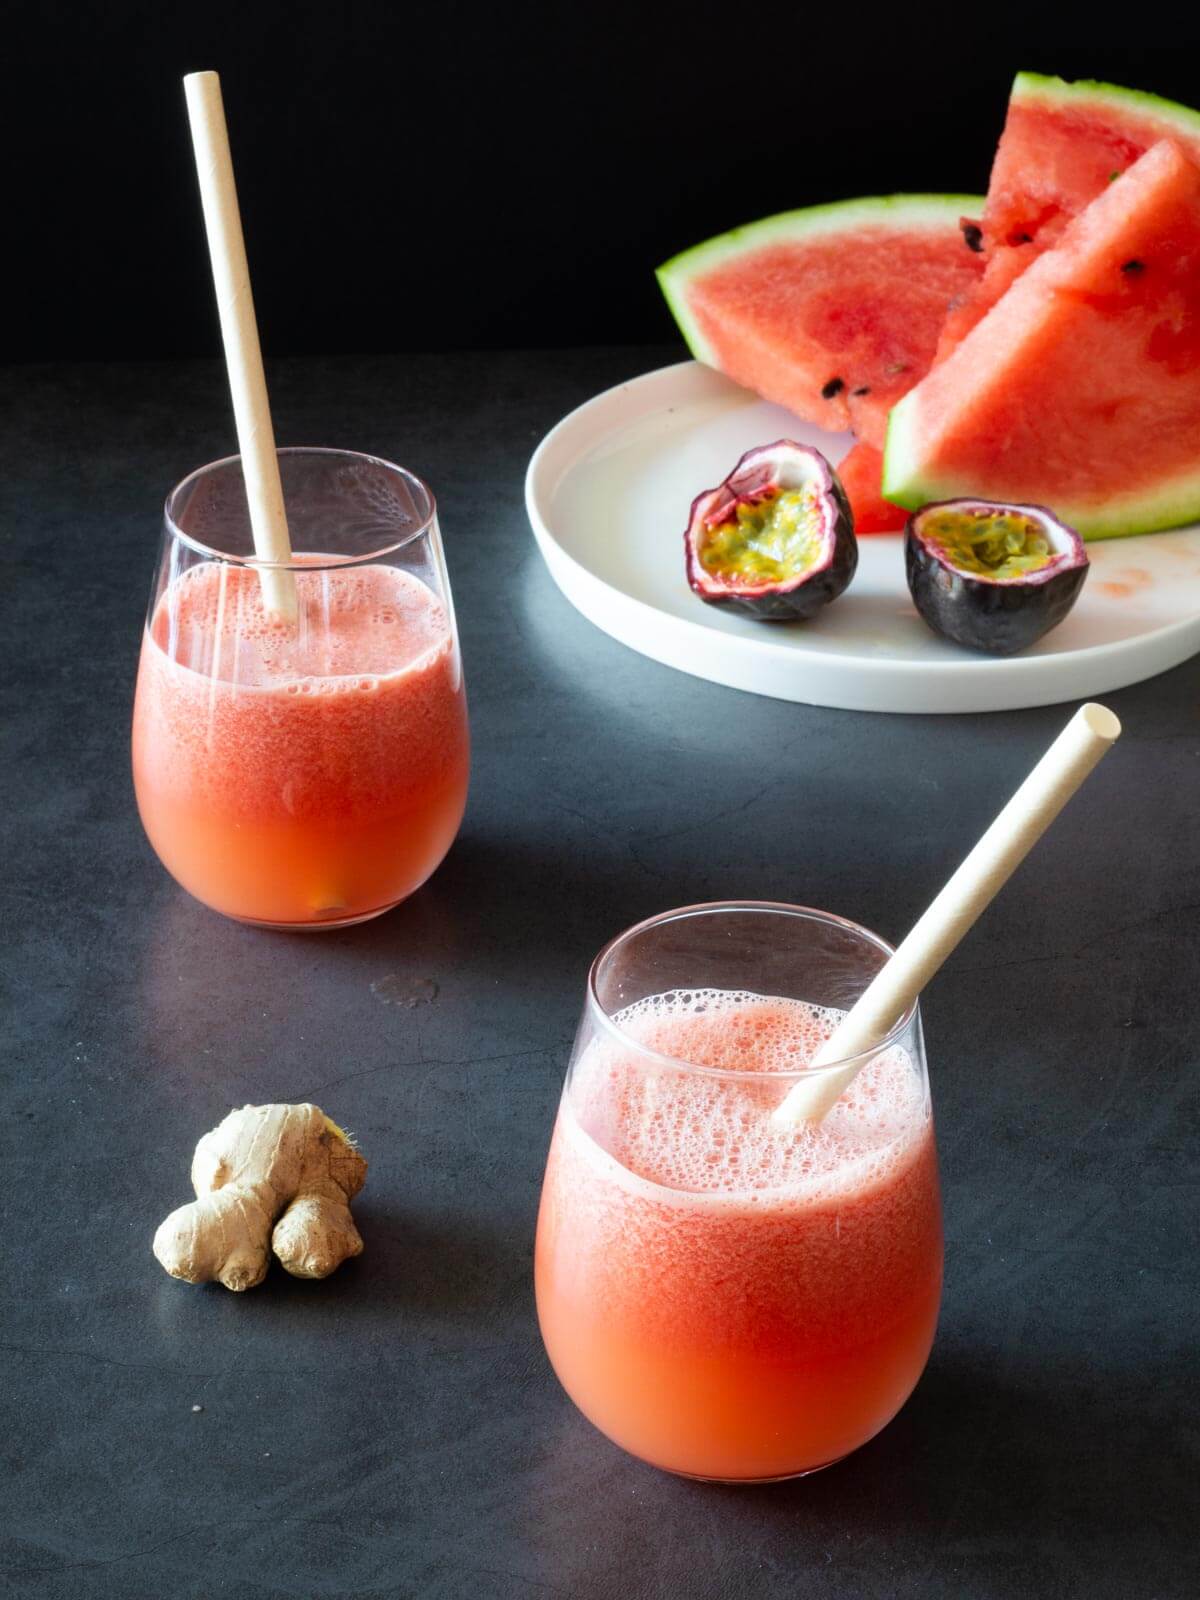 Passion Fruit and Watermelon Juice glass one of the best juicing recipes for detox